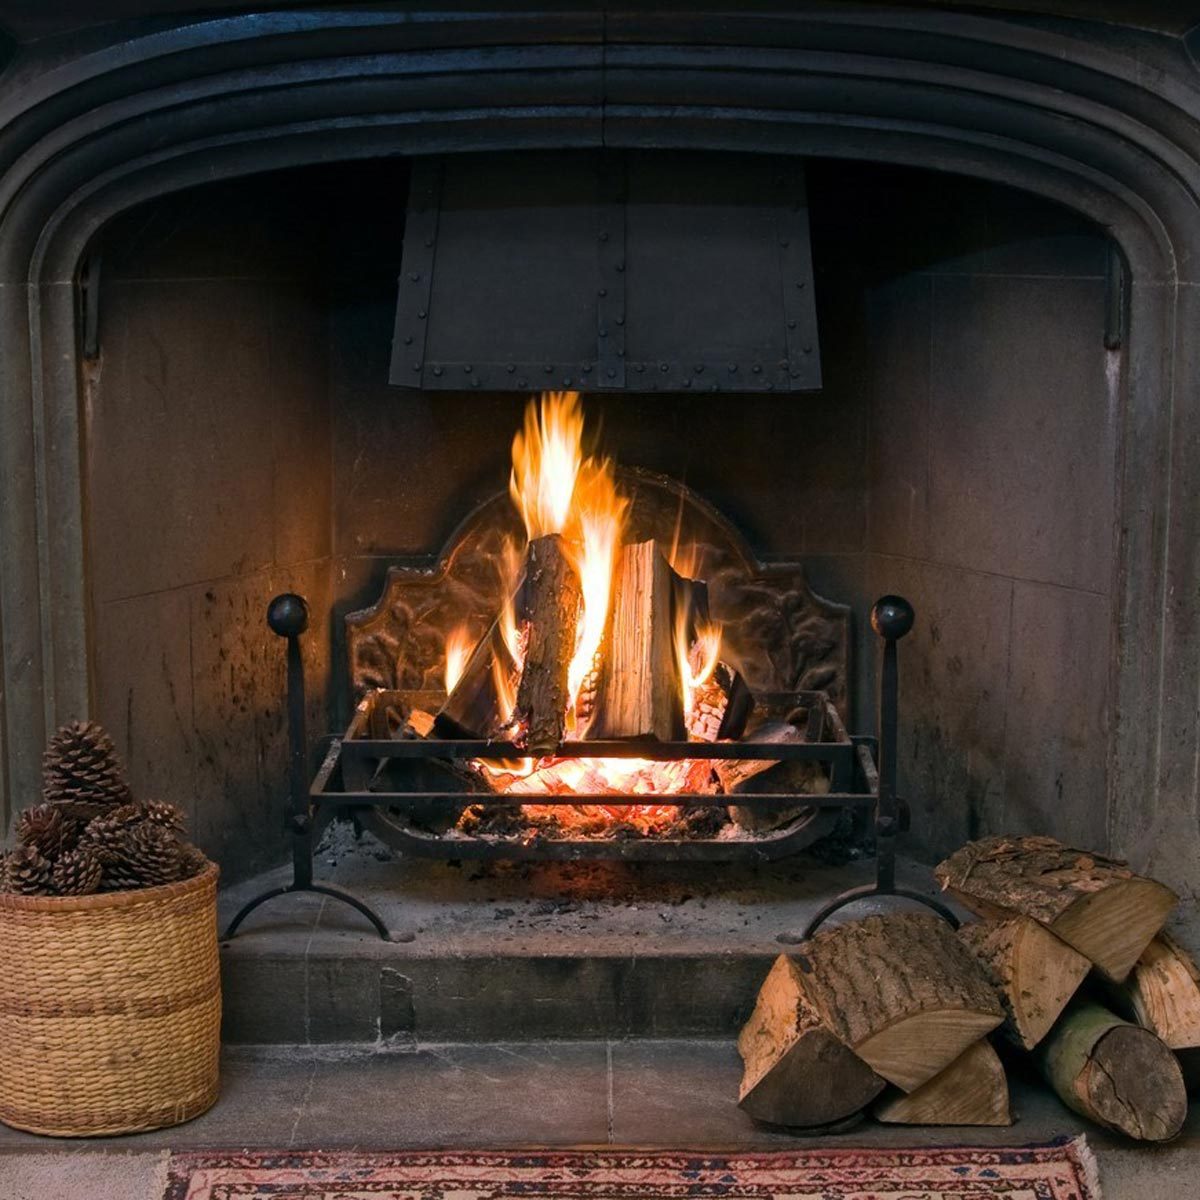 fire within a large stone arched fireplace, with pile of logs and basket of pine kernels